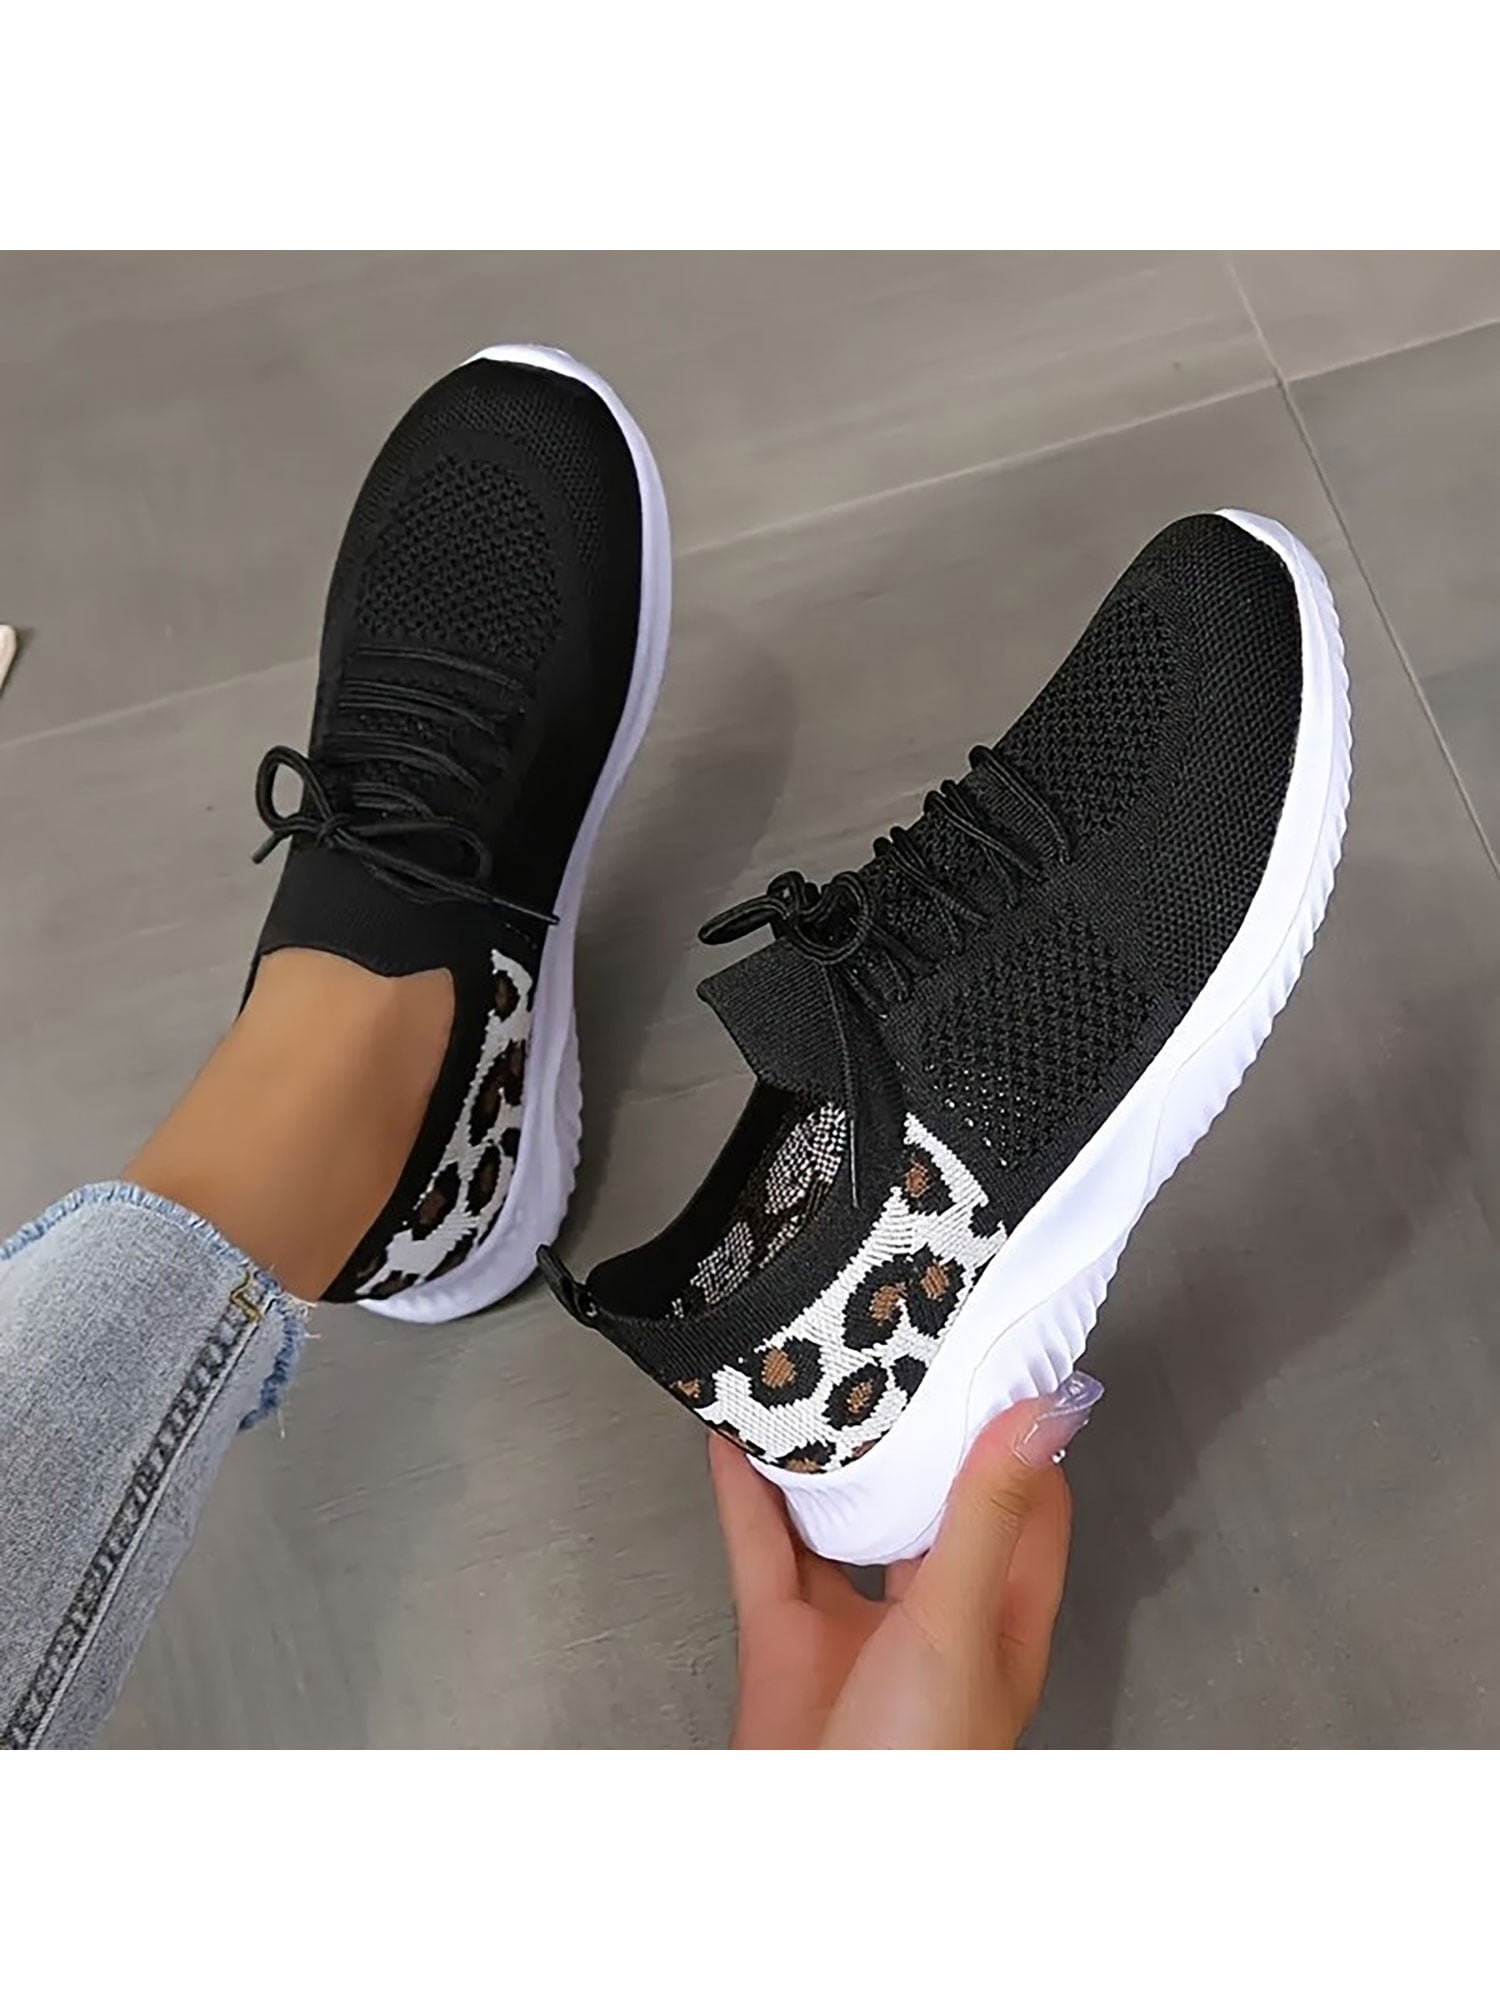 wazig misdrijf Knorrig Sanviglor Women Athletic Shoes Leopard Print Sneakers Lace Up Running Shoe  Fitness Fashion Breathable Flats Lightweight Mesh Trainers Black 7 -  Walmart.com